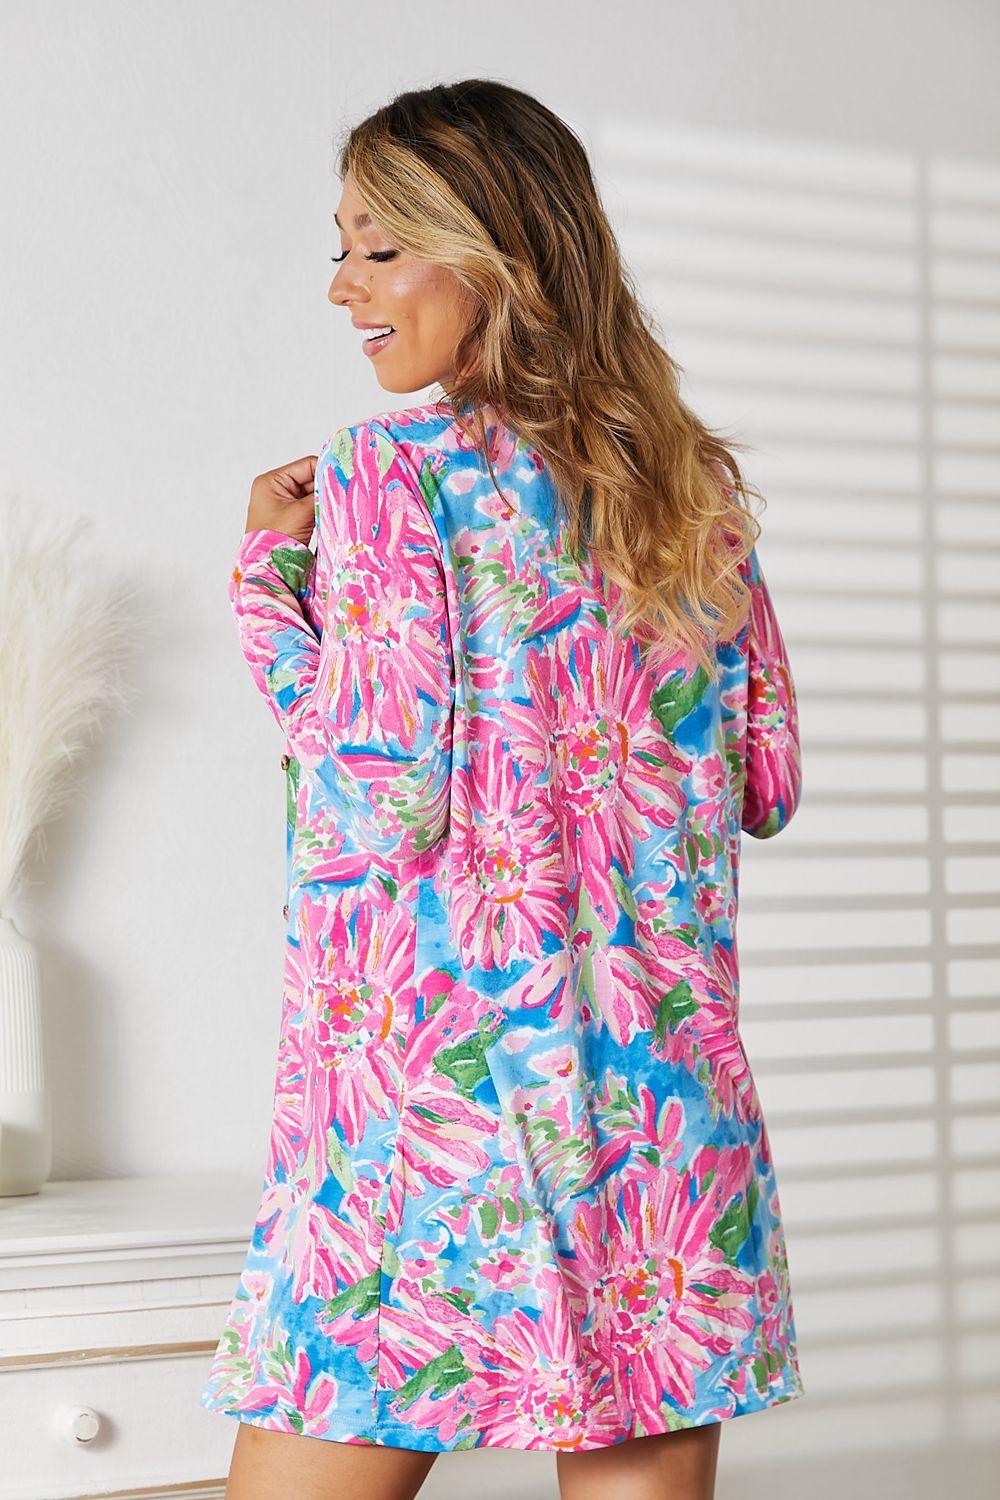 Double Take Floral Open Front Long Sleeve Cardigan - Anchored Feather Boutique